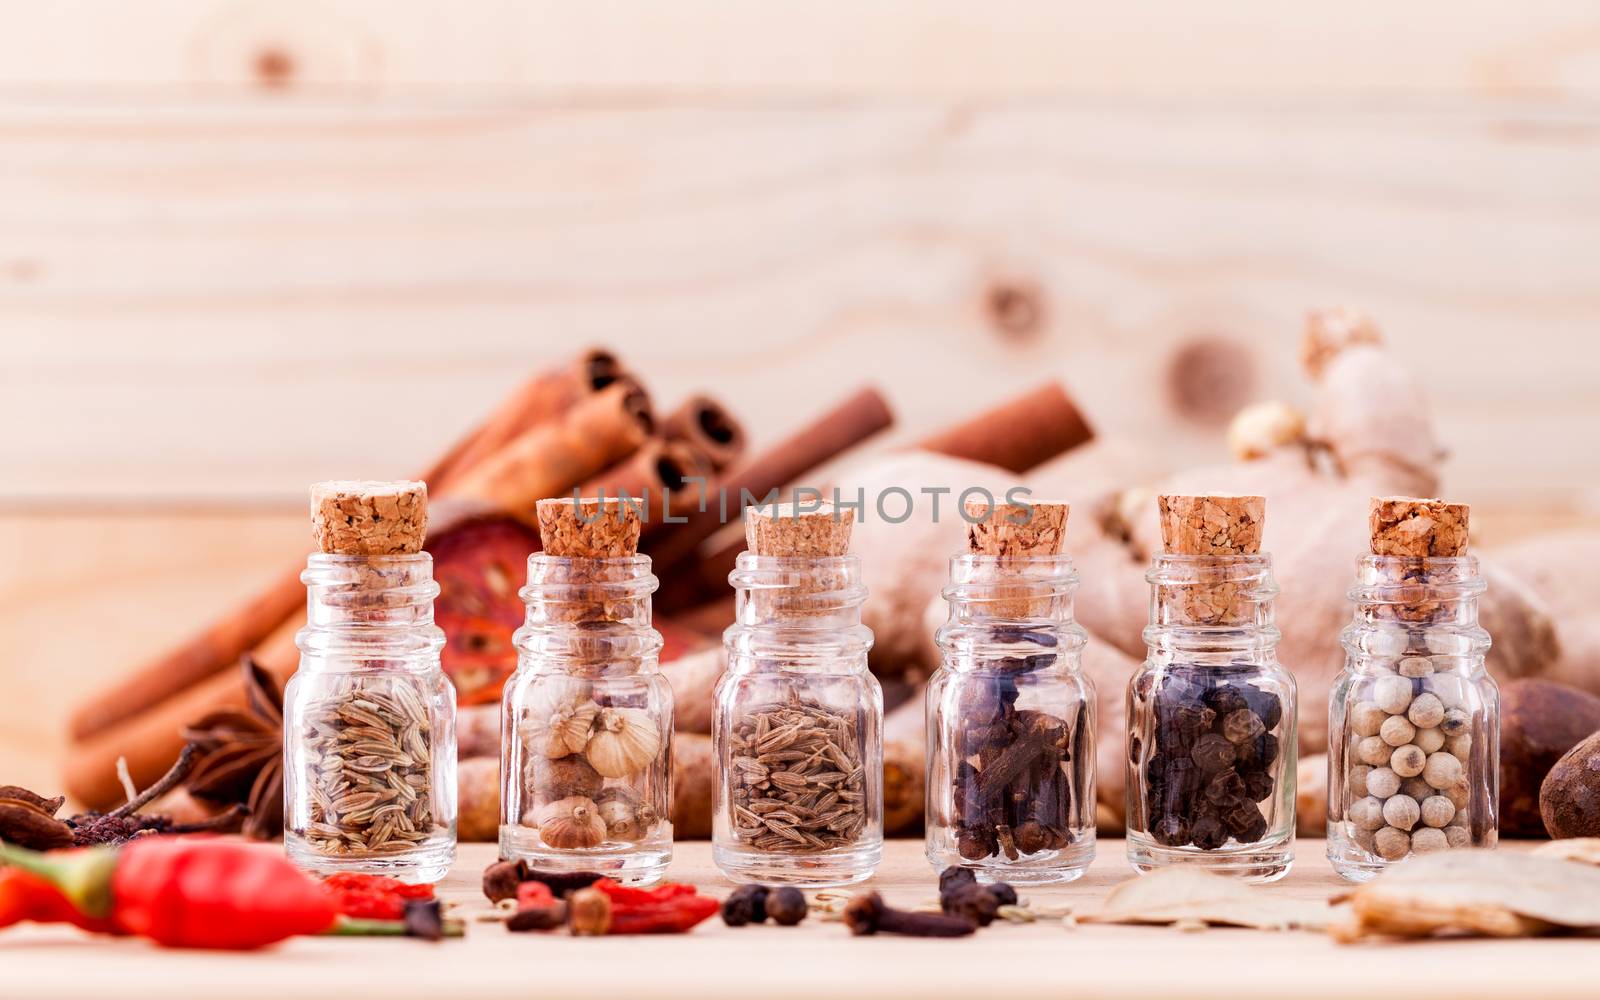 Assortment of Thai food Cooking ingredients in glass bottles on wooden background.